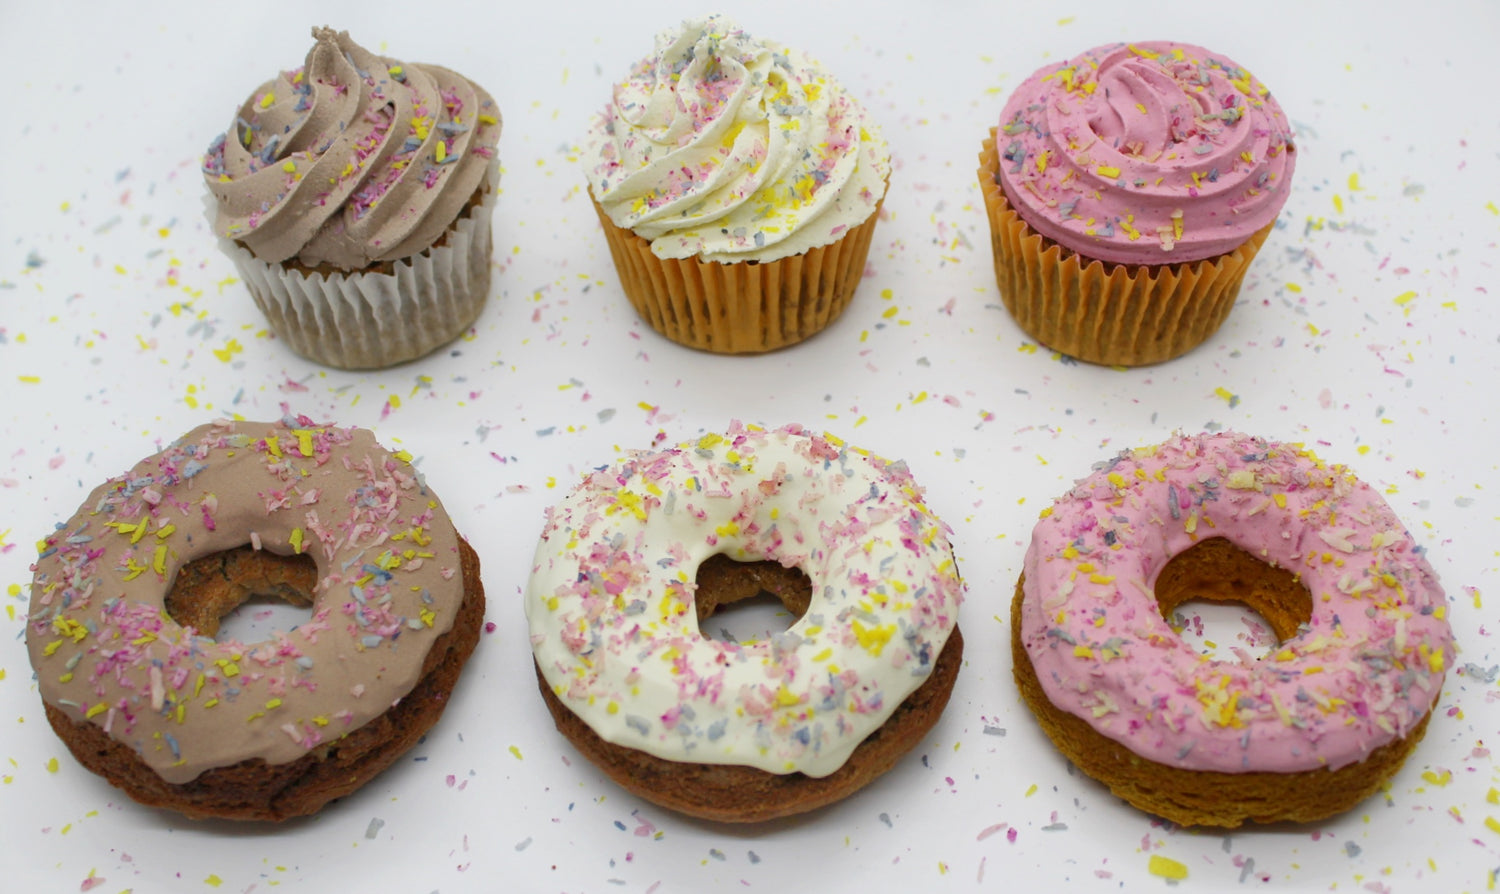 Six delicious bakery items covered in rainbow coconut shreds. The front row has three differently frosted donuts carob brown, plain white, and beet pink. The back row has three frosted dog cupcakes, there is carob brown, plain white, and beet pink.